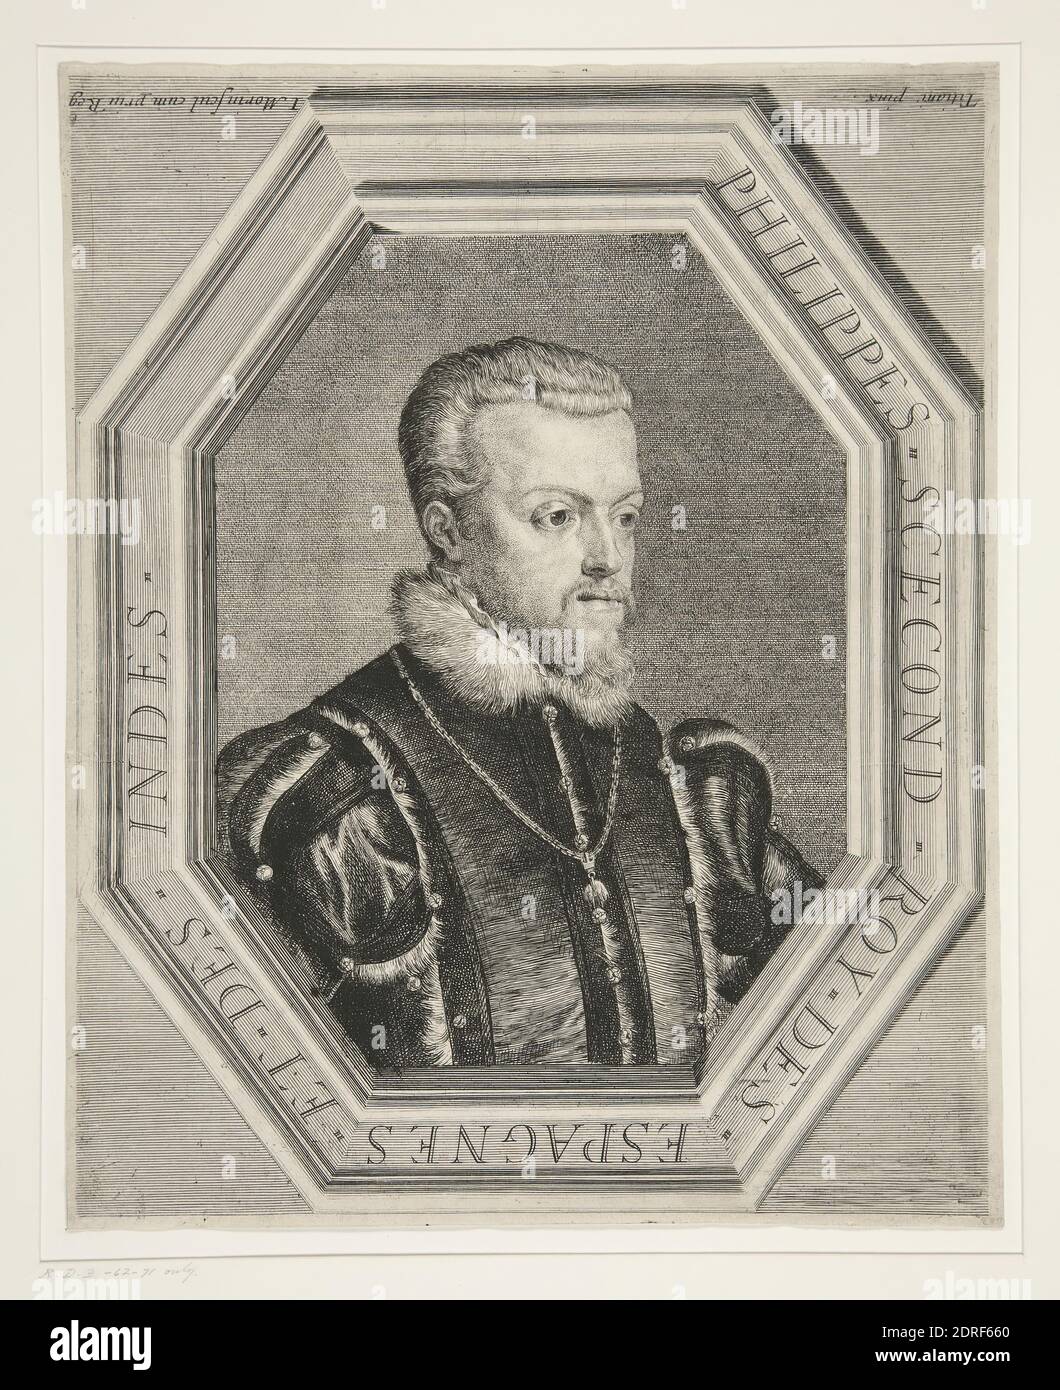 Artist: Jean Morin, French, ca. 1605–1650, After: Titian (Tiziano Vecellio), Italian, Venice, ca. 1488–1576, Philip II of Spain, Engraving, sheet: 11 15/16 × 9 5/8 in. (30.3 × 24.5 cm), French, 17th century, Works on Paper - Prints Stock Photo